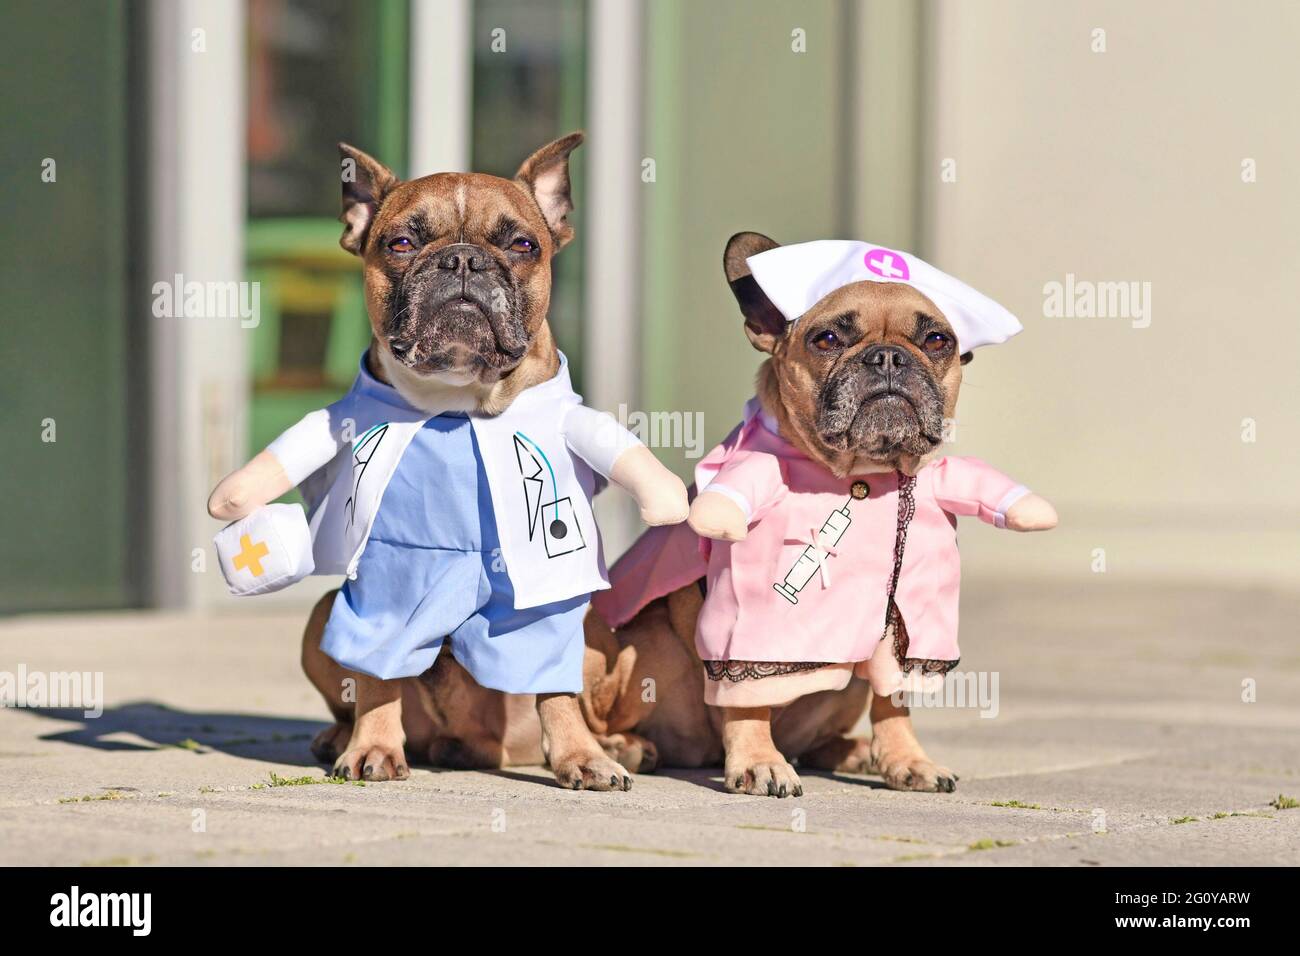 French Bulldog dogs dressed up with doctor and nurse costume with fake arms Stock Photo